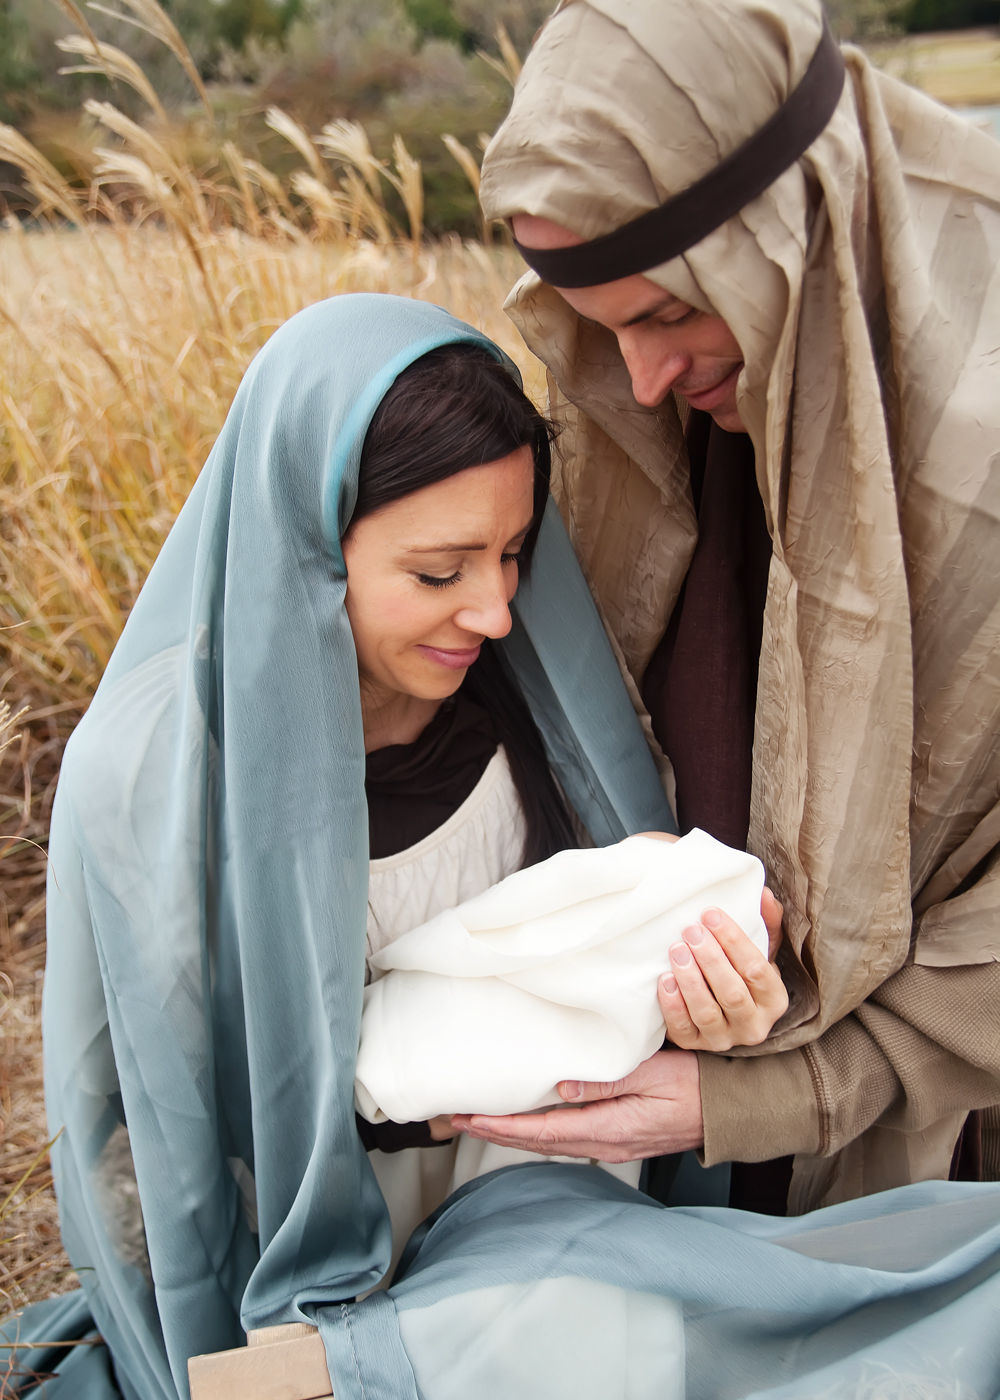 Prosper Mormons to recreate Christmas story with Live Nativity Dec 12 in Frontier Park